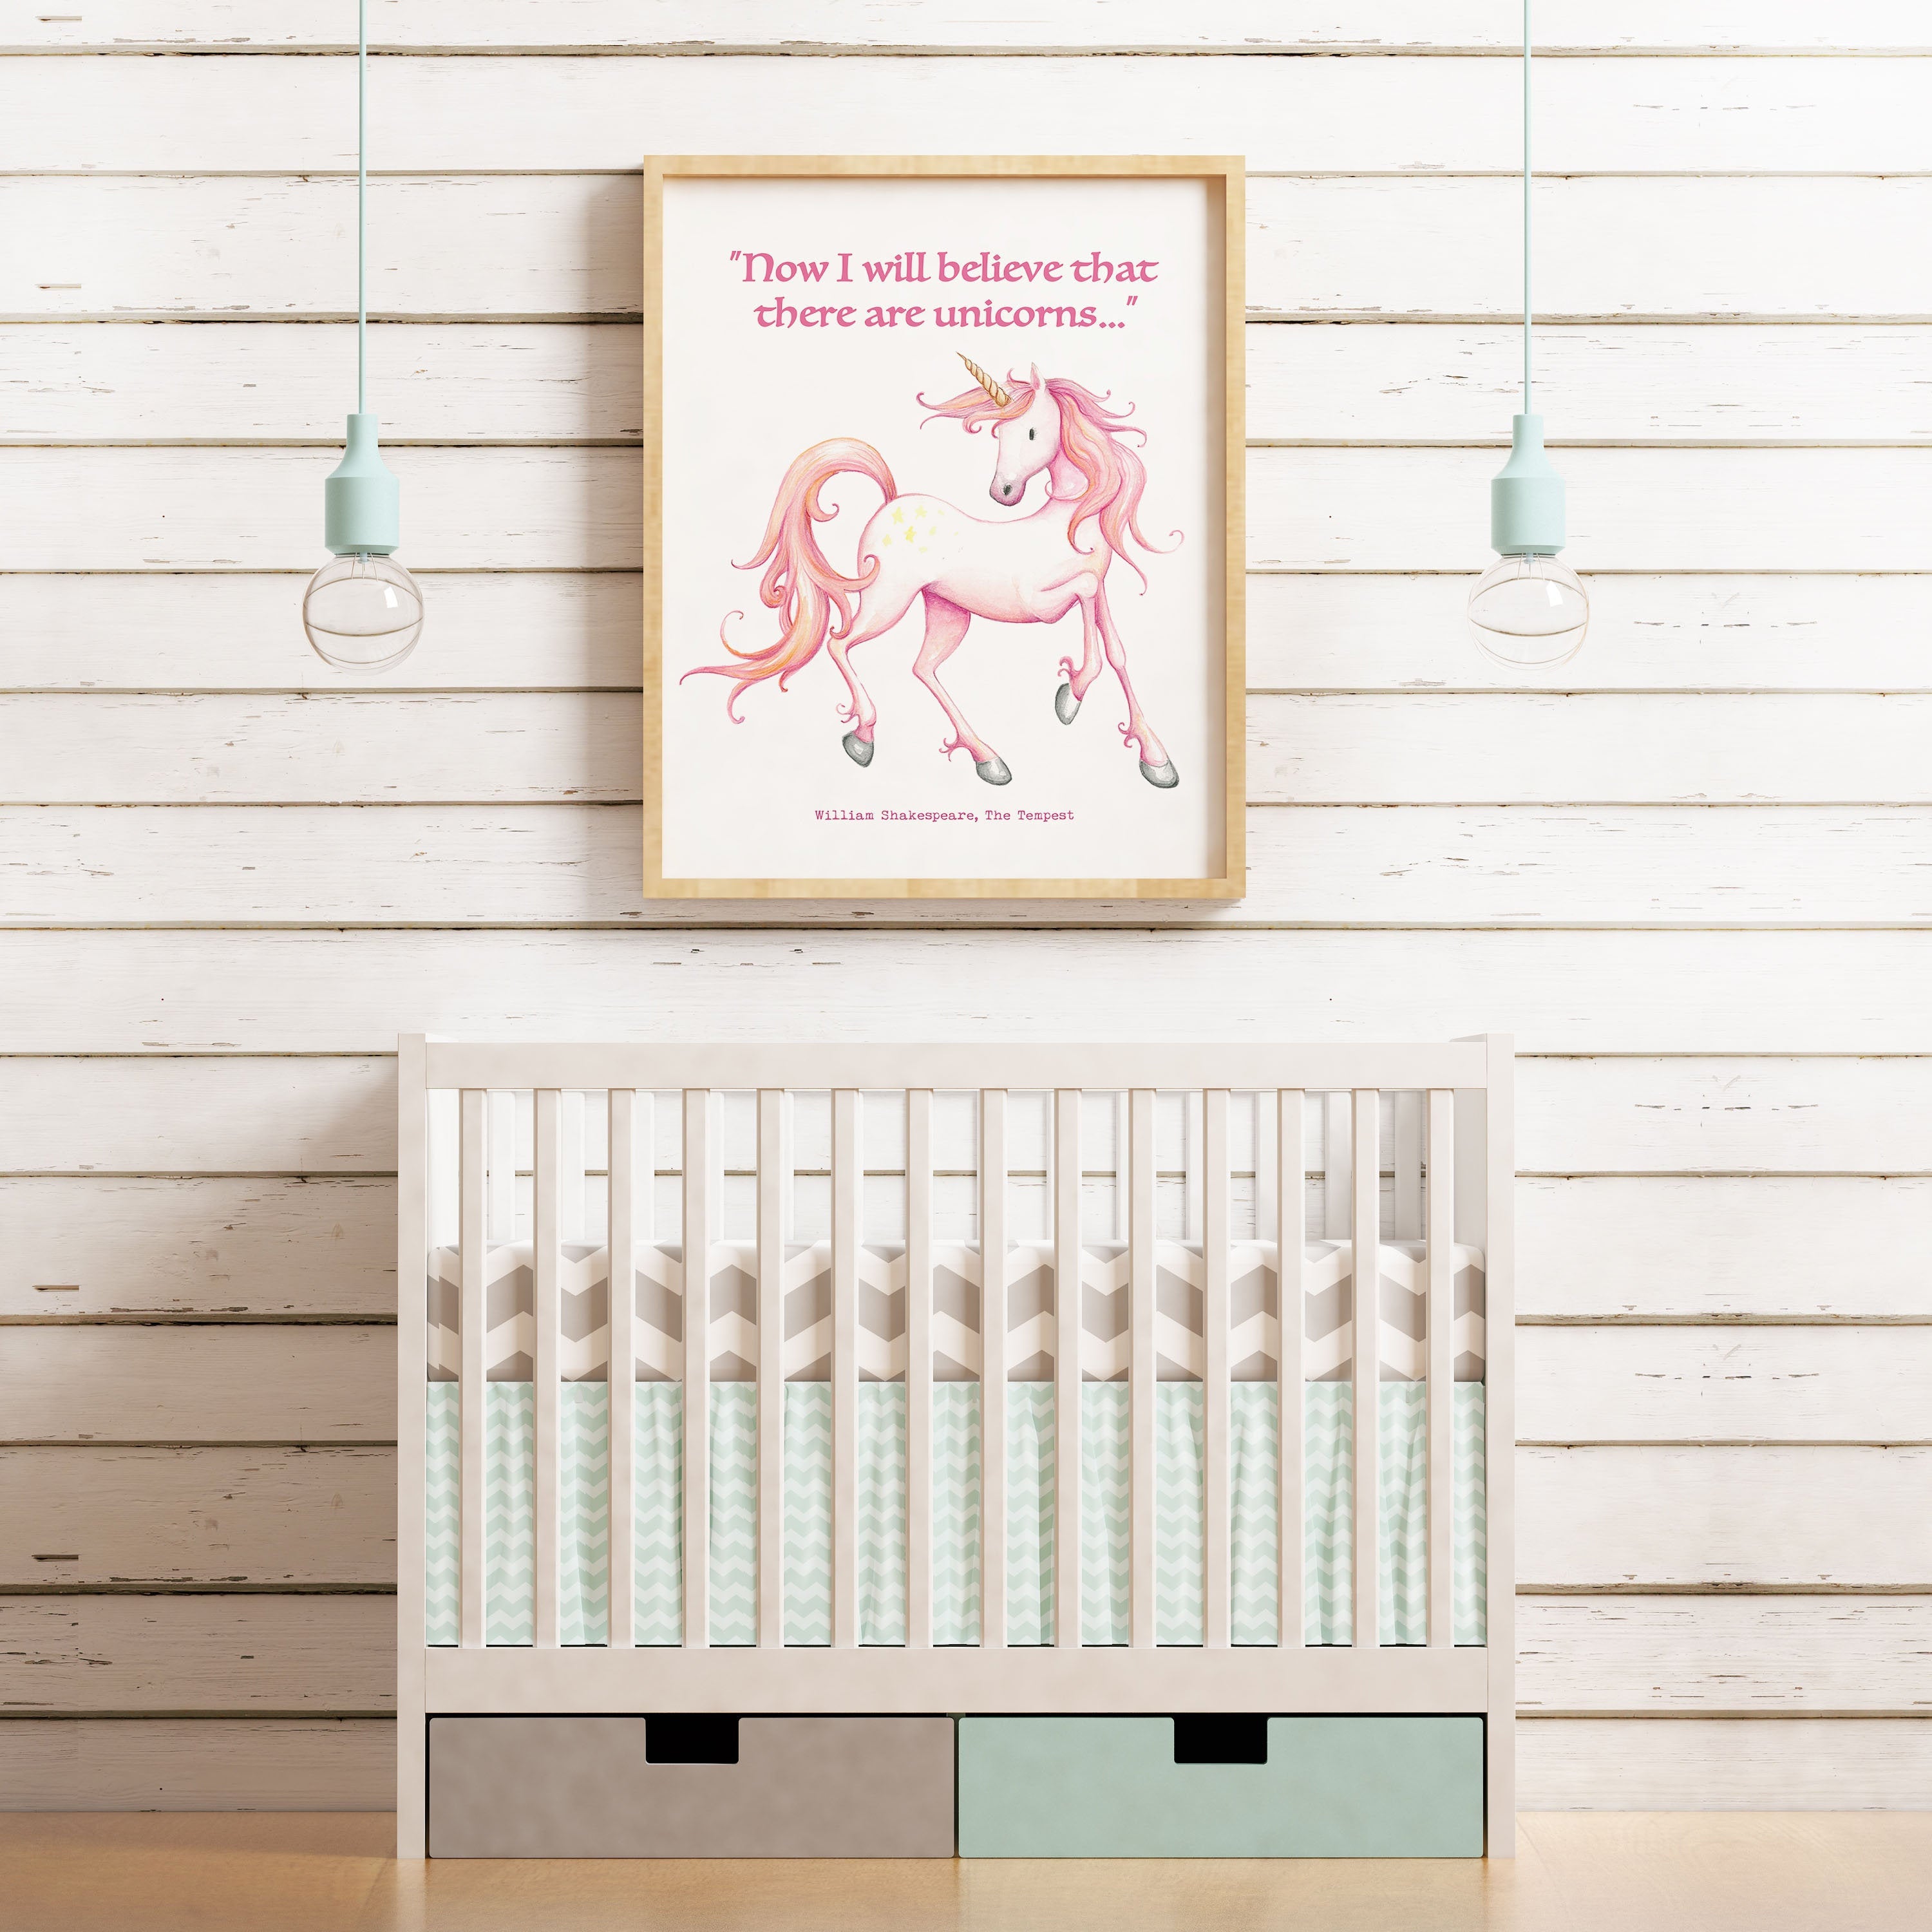 Shakespeare Quote Print The Tempest, Now I Will Believe That There Are Unicorns